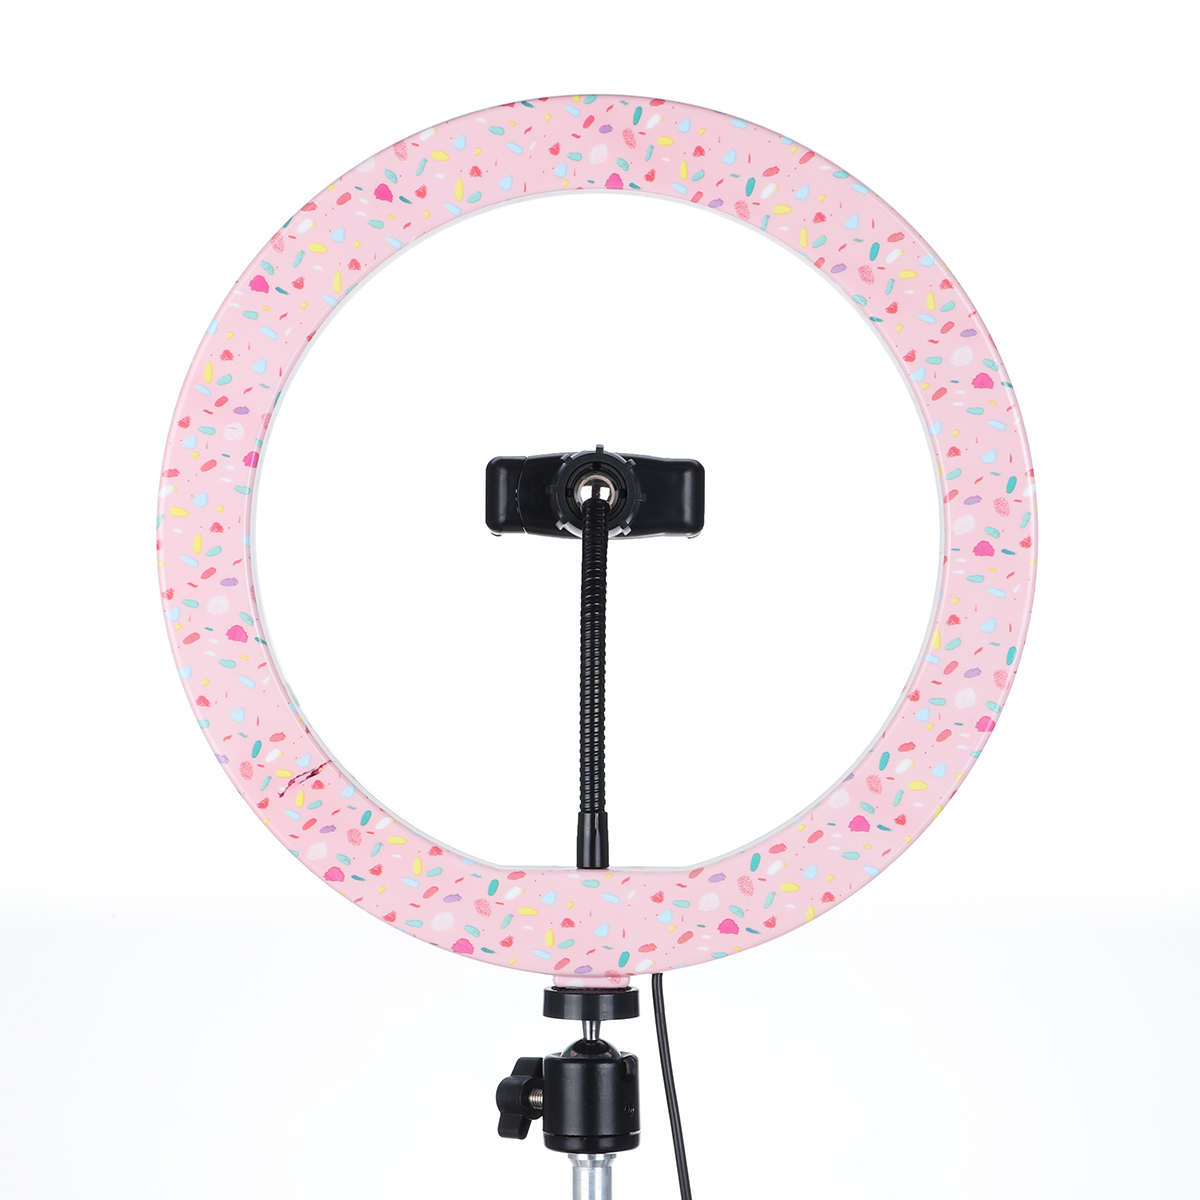 10-inch-LED-Ring-Light-Fill-Light-For-Makeup-Streaming-Selfie-Beauty-Photography-Makeup-Mirror-Light-1634941-9